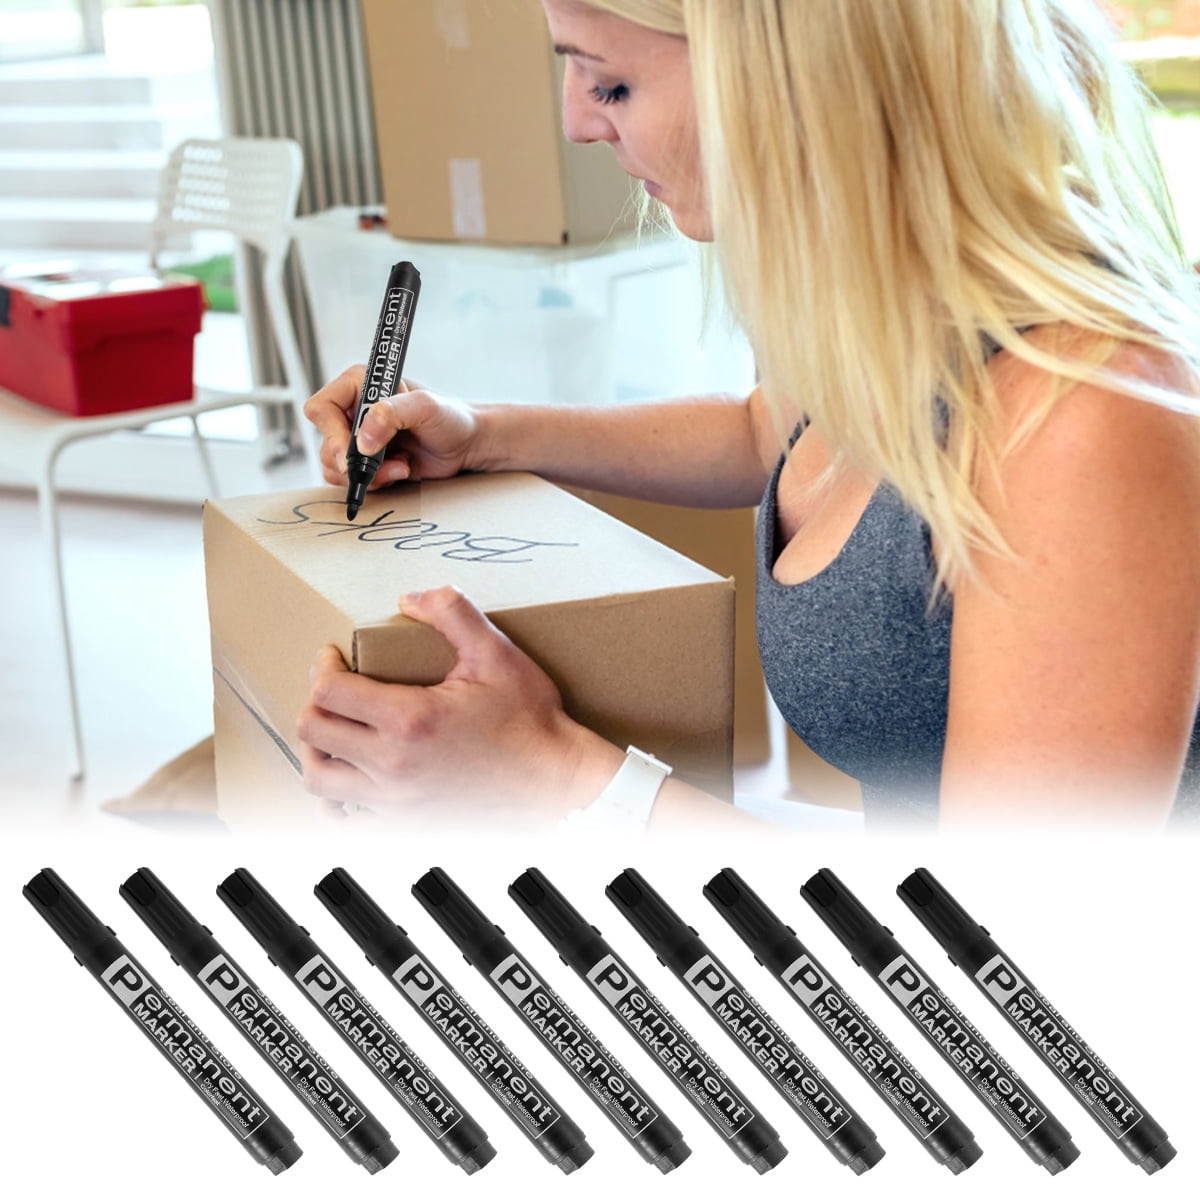 Toorise 10pcs Permanent Marker Pens Bullet Tip Markers Waterproof Black  Marker Set Non-fading Paint Pens Works on Plastic Wood Stone Metal Glass  for